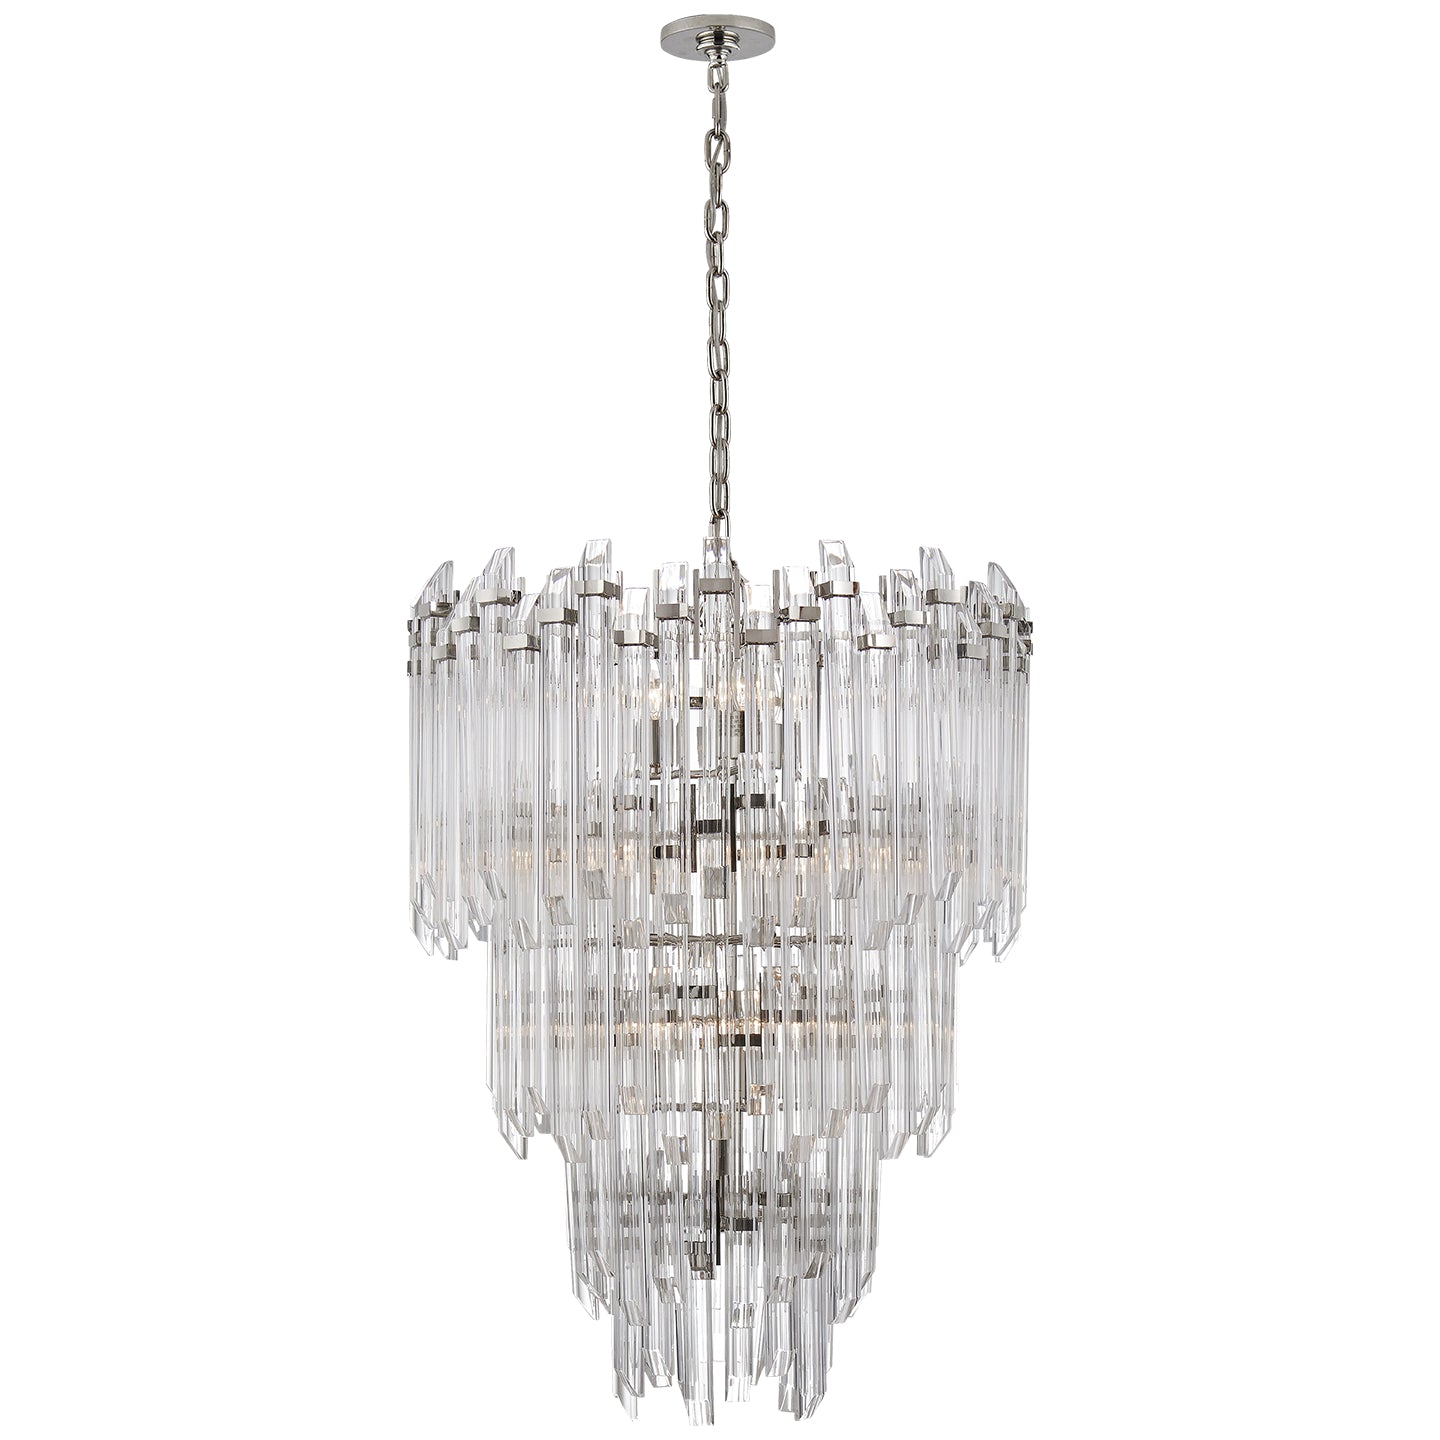 Visual Comfort Signature Canada - 12 Light Chandelier - Adele - Polished Nickel with Clear Acrylic- Union Lighting Luminaires Decor